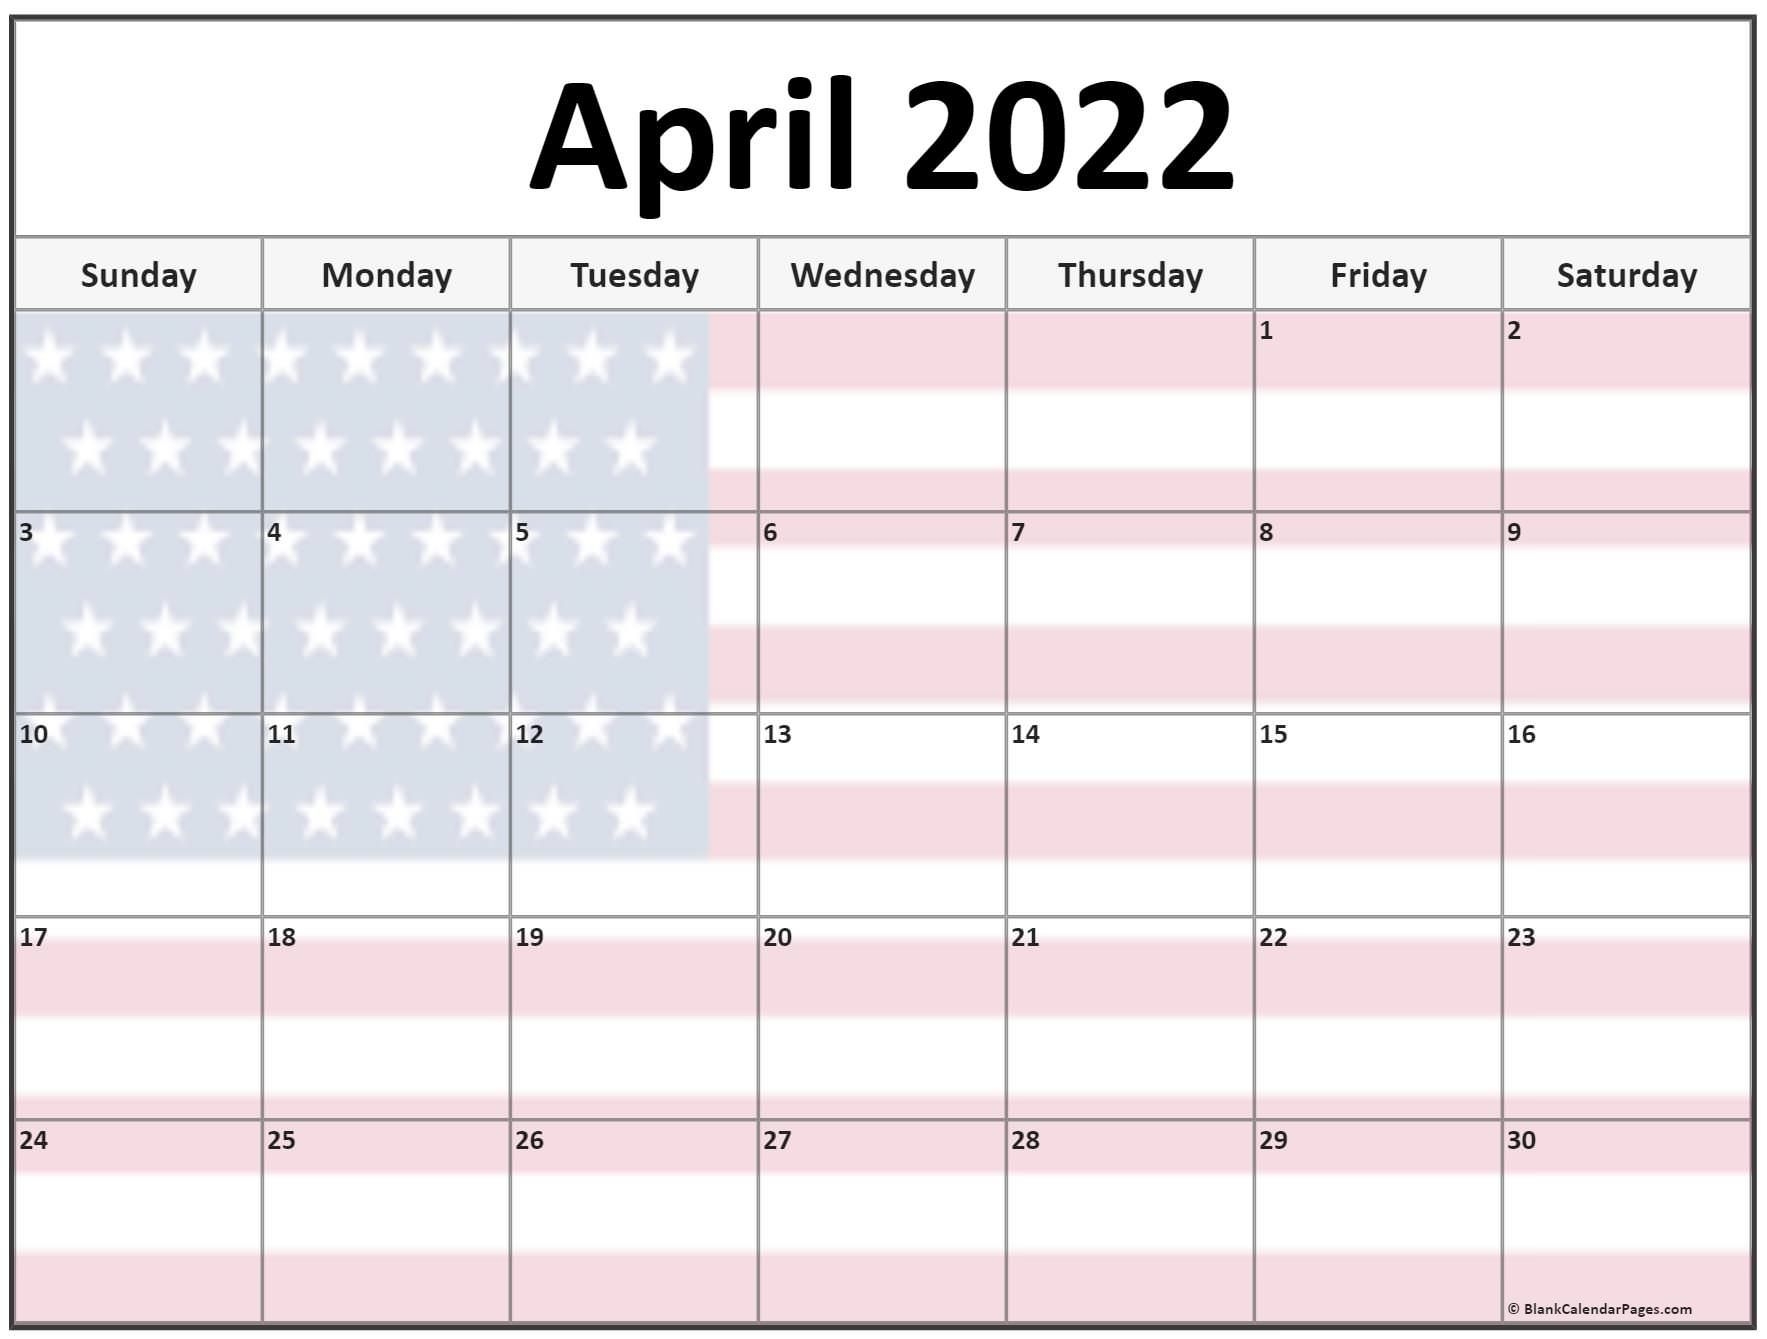 Collection Of April 2022 Photo Calendars With Image Filters.